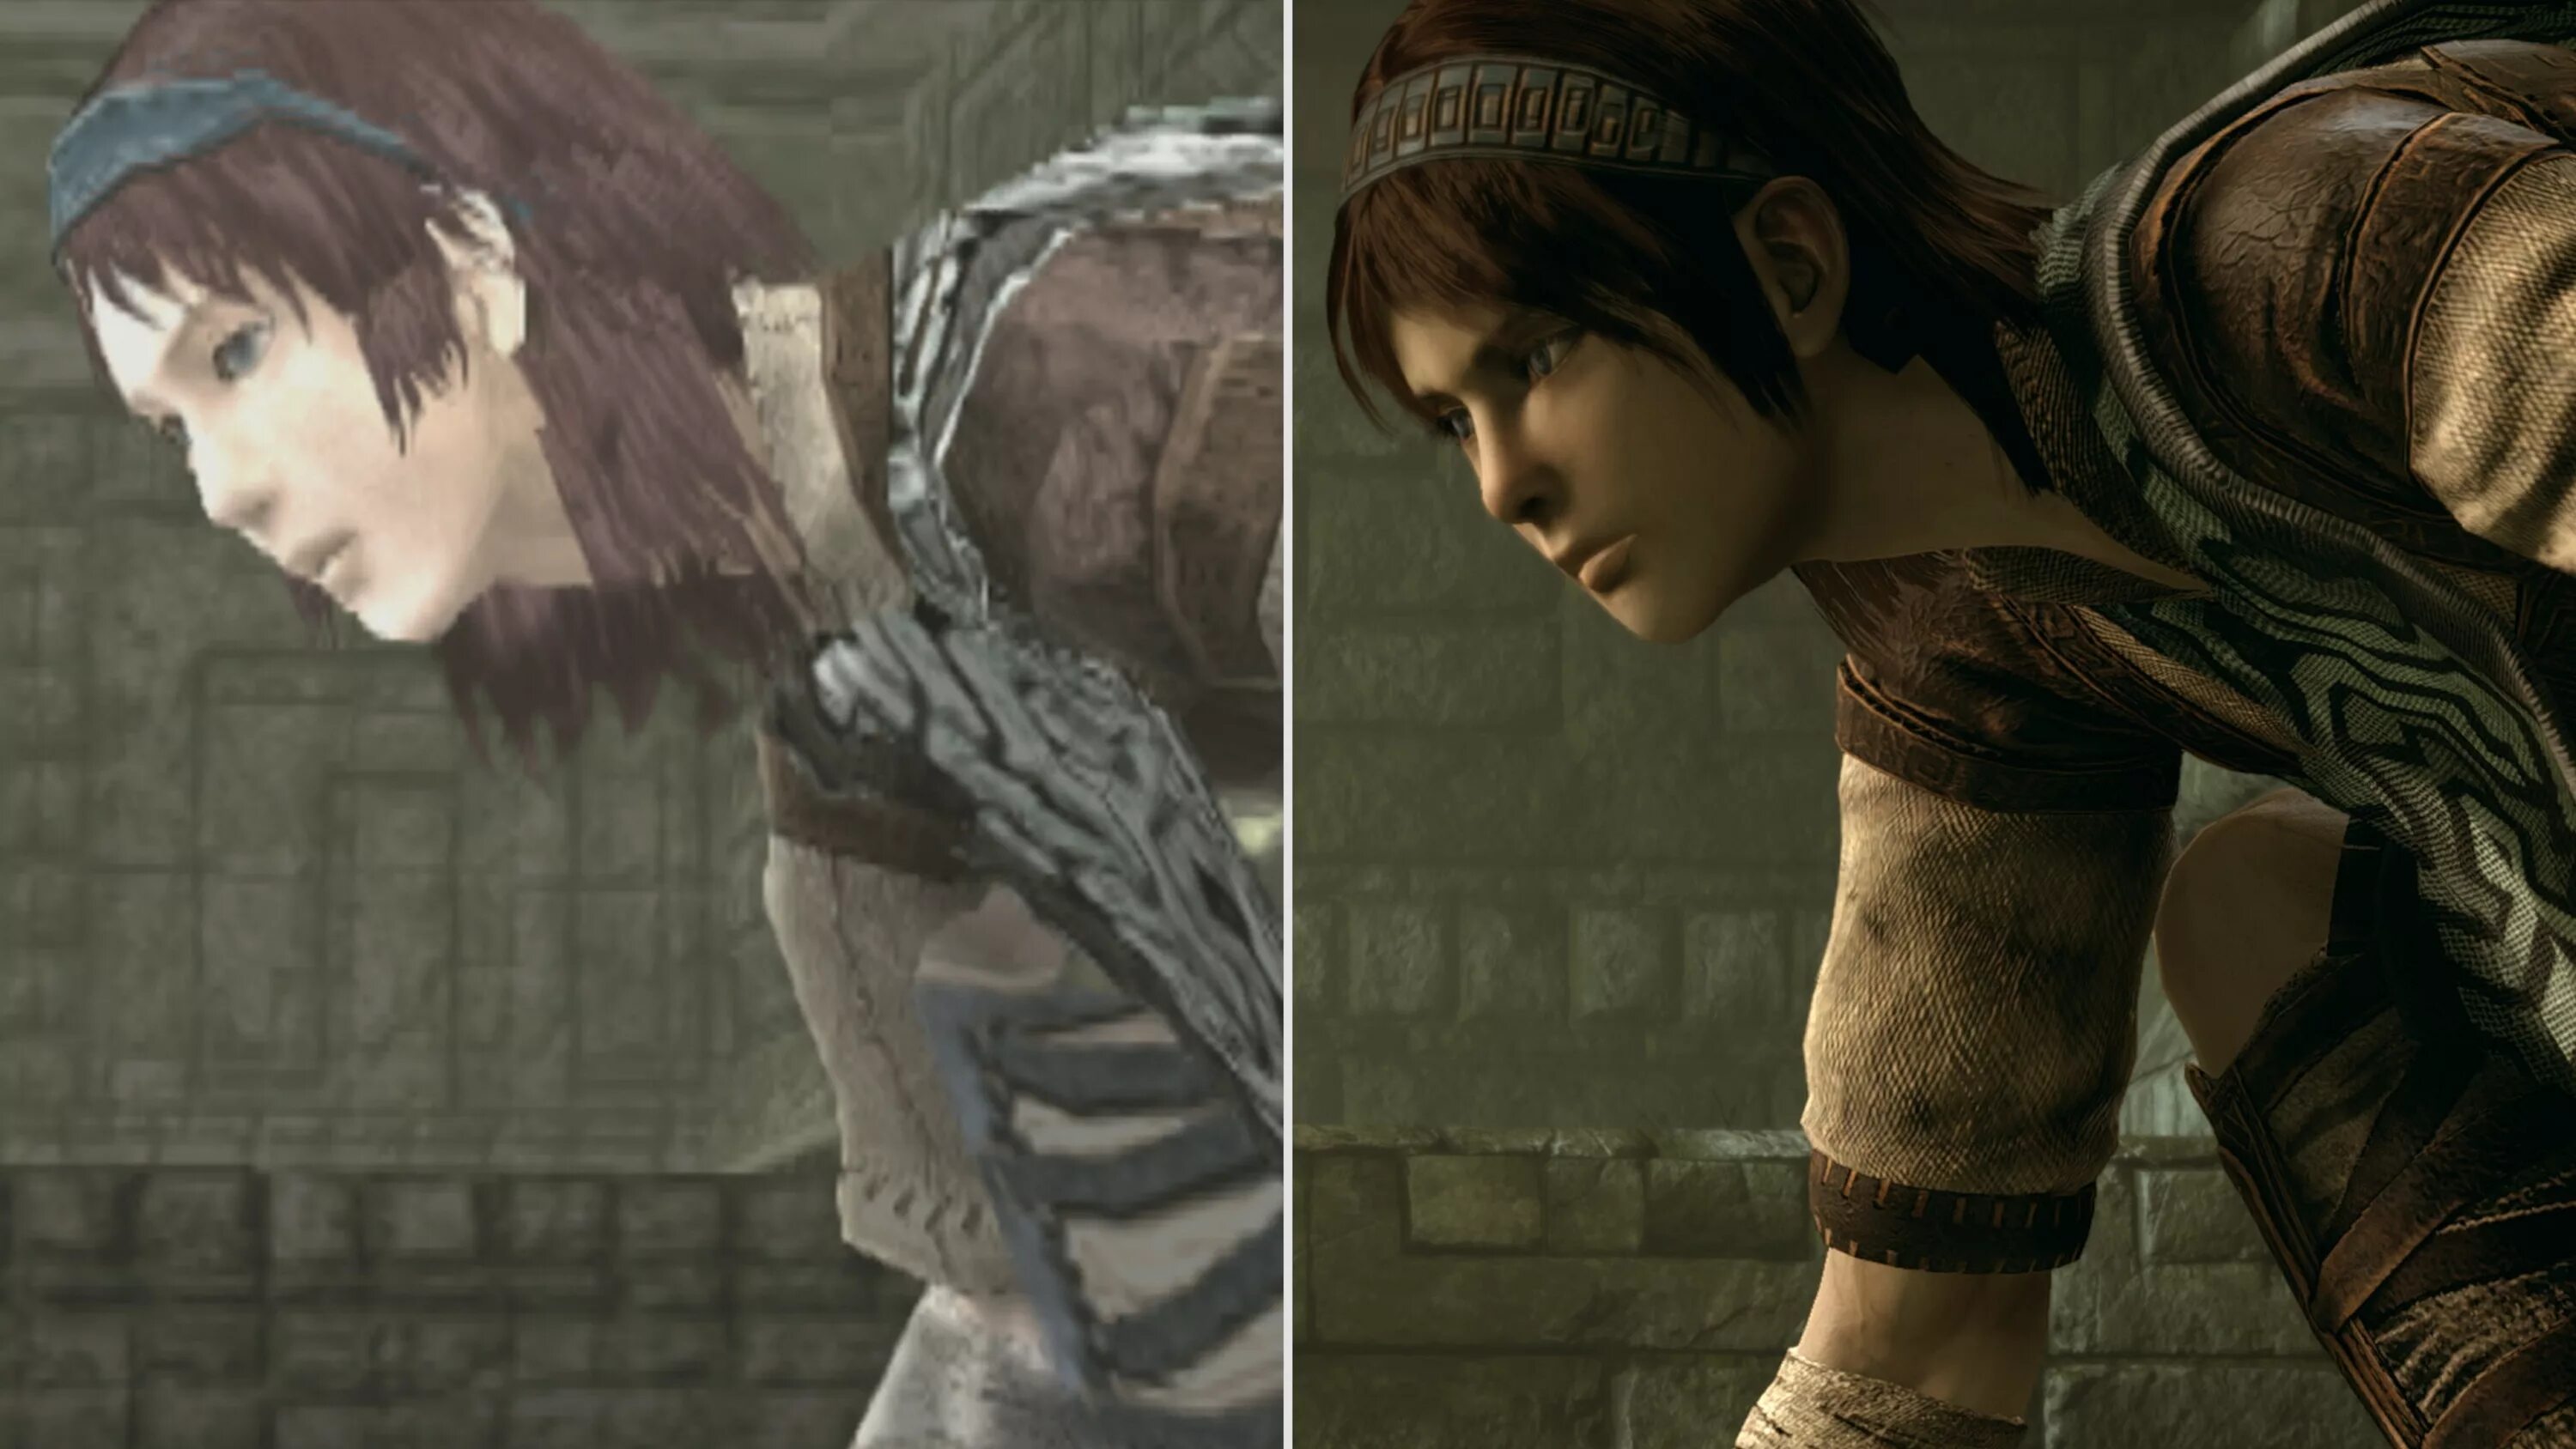 Ps2 graphics. Shadow of the Colossus ps2. Shadow of the Colossus 2005. Shadow of the Colossus ПС 2. Shadows of Colossus ps2 и ps4.